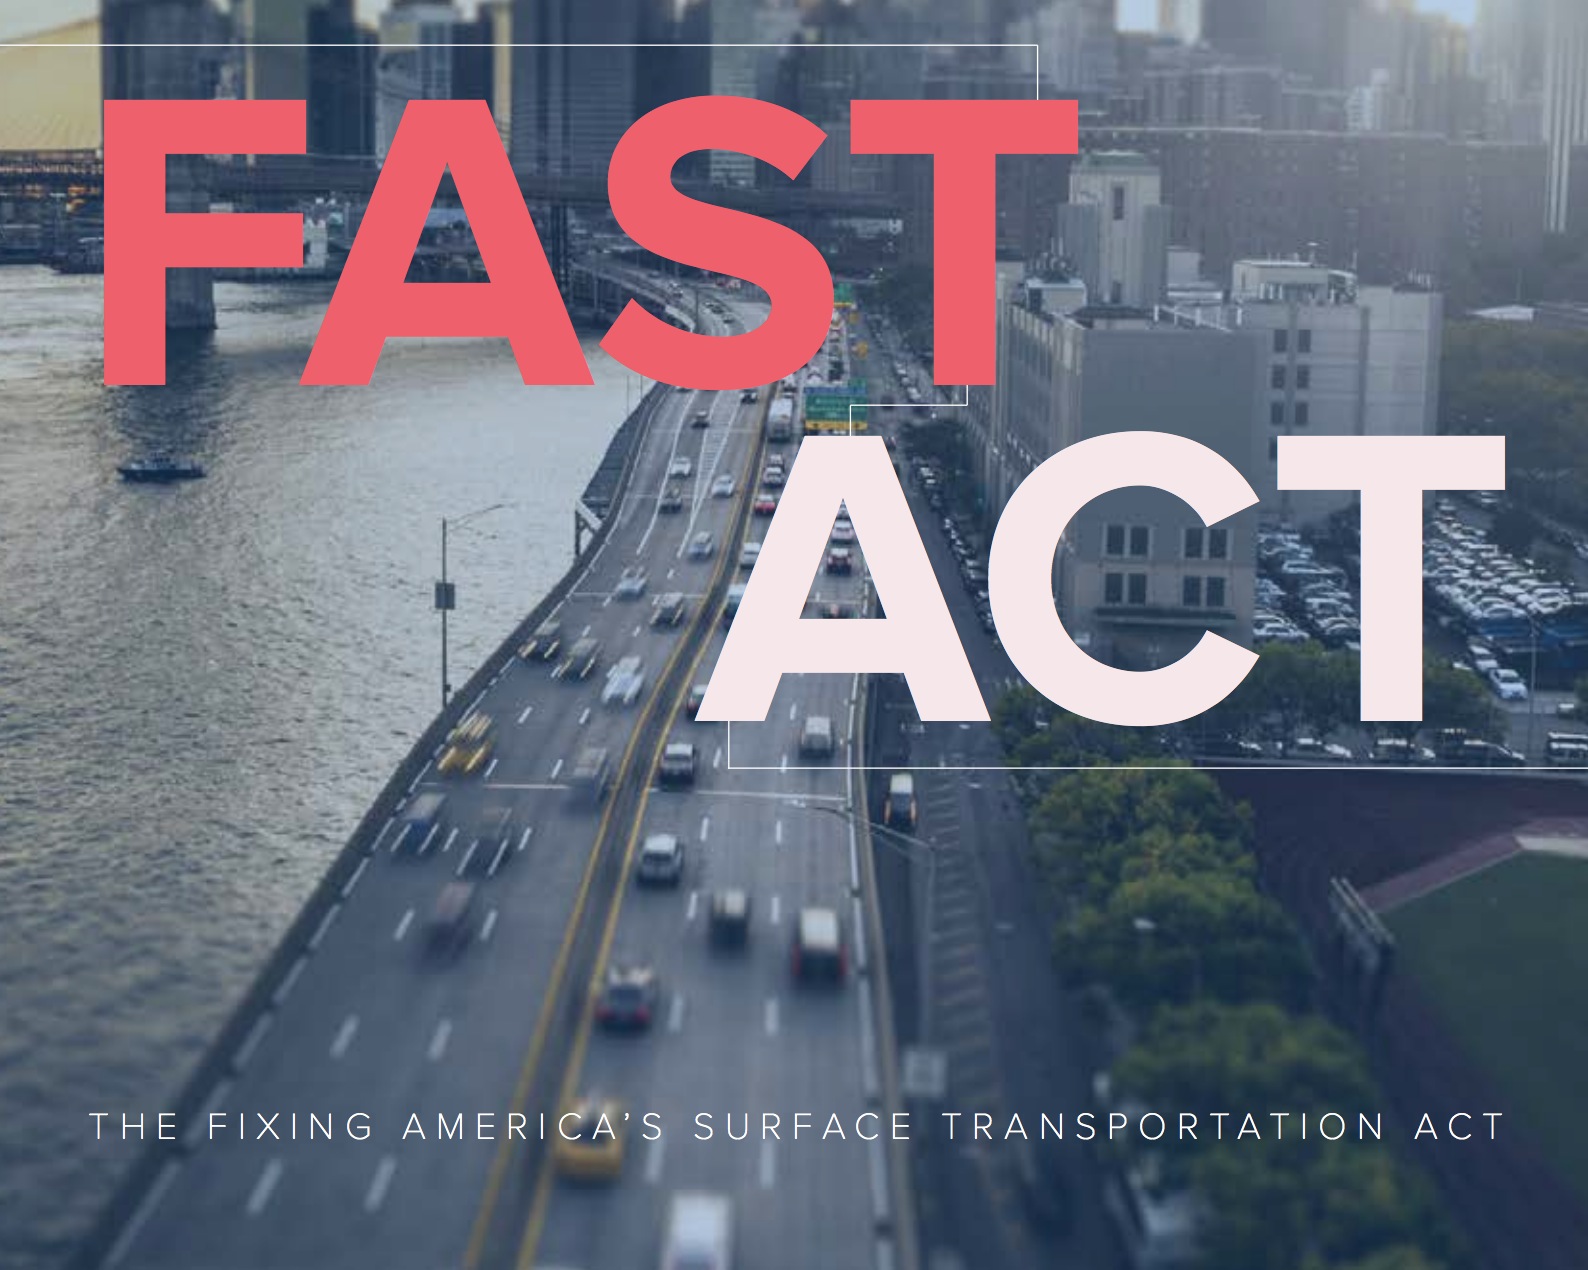 The FAST Act